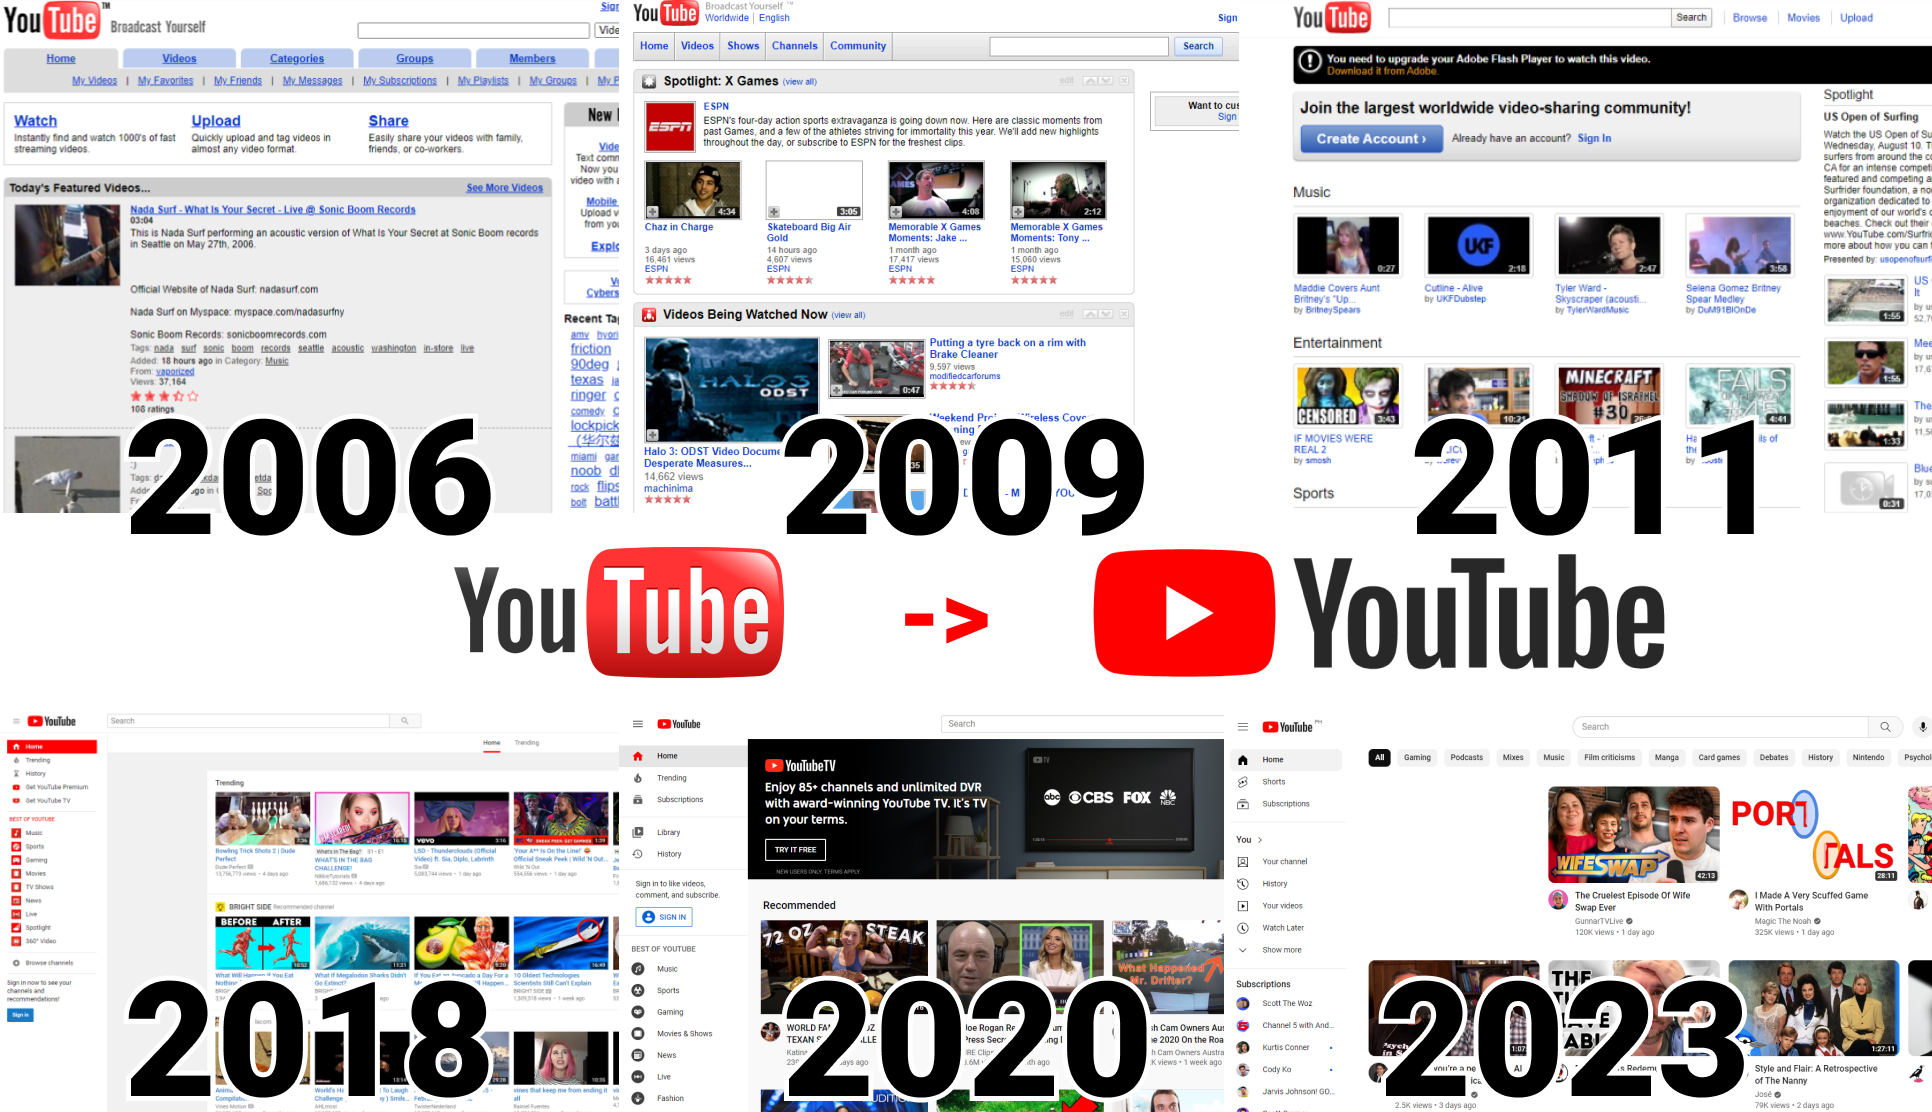 History of YouTube: The Complete Evolution